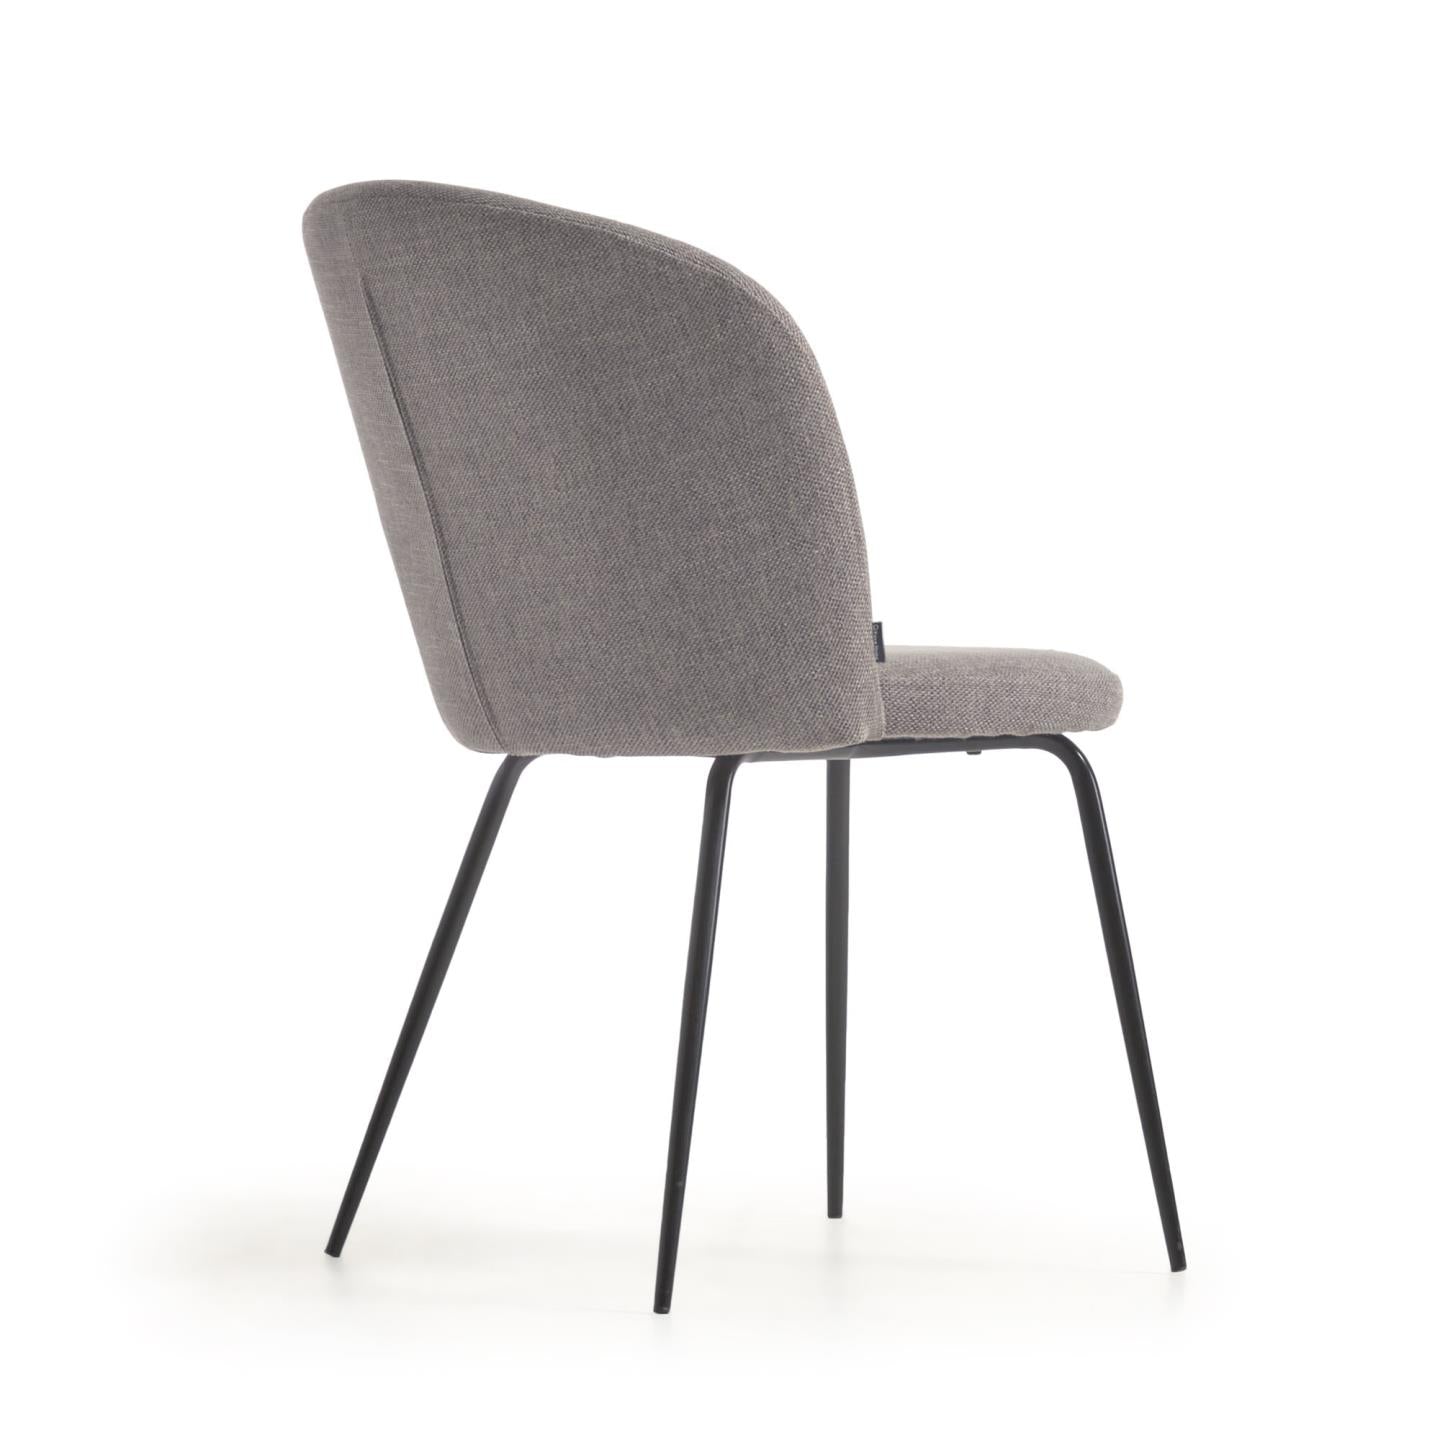 Anoha chair in grey with metal with black finish